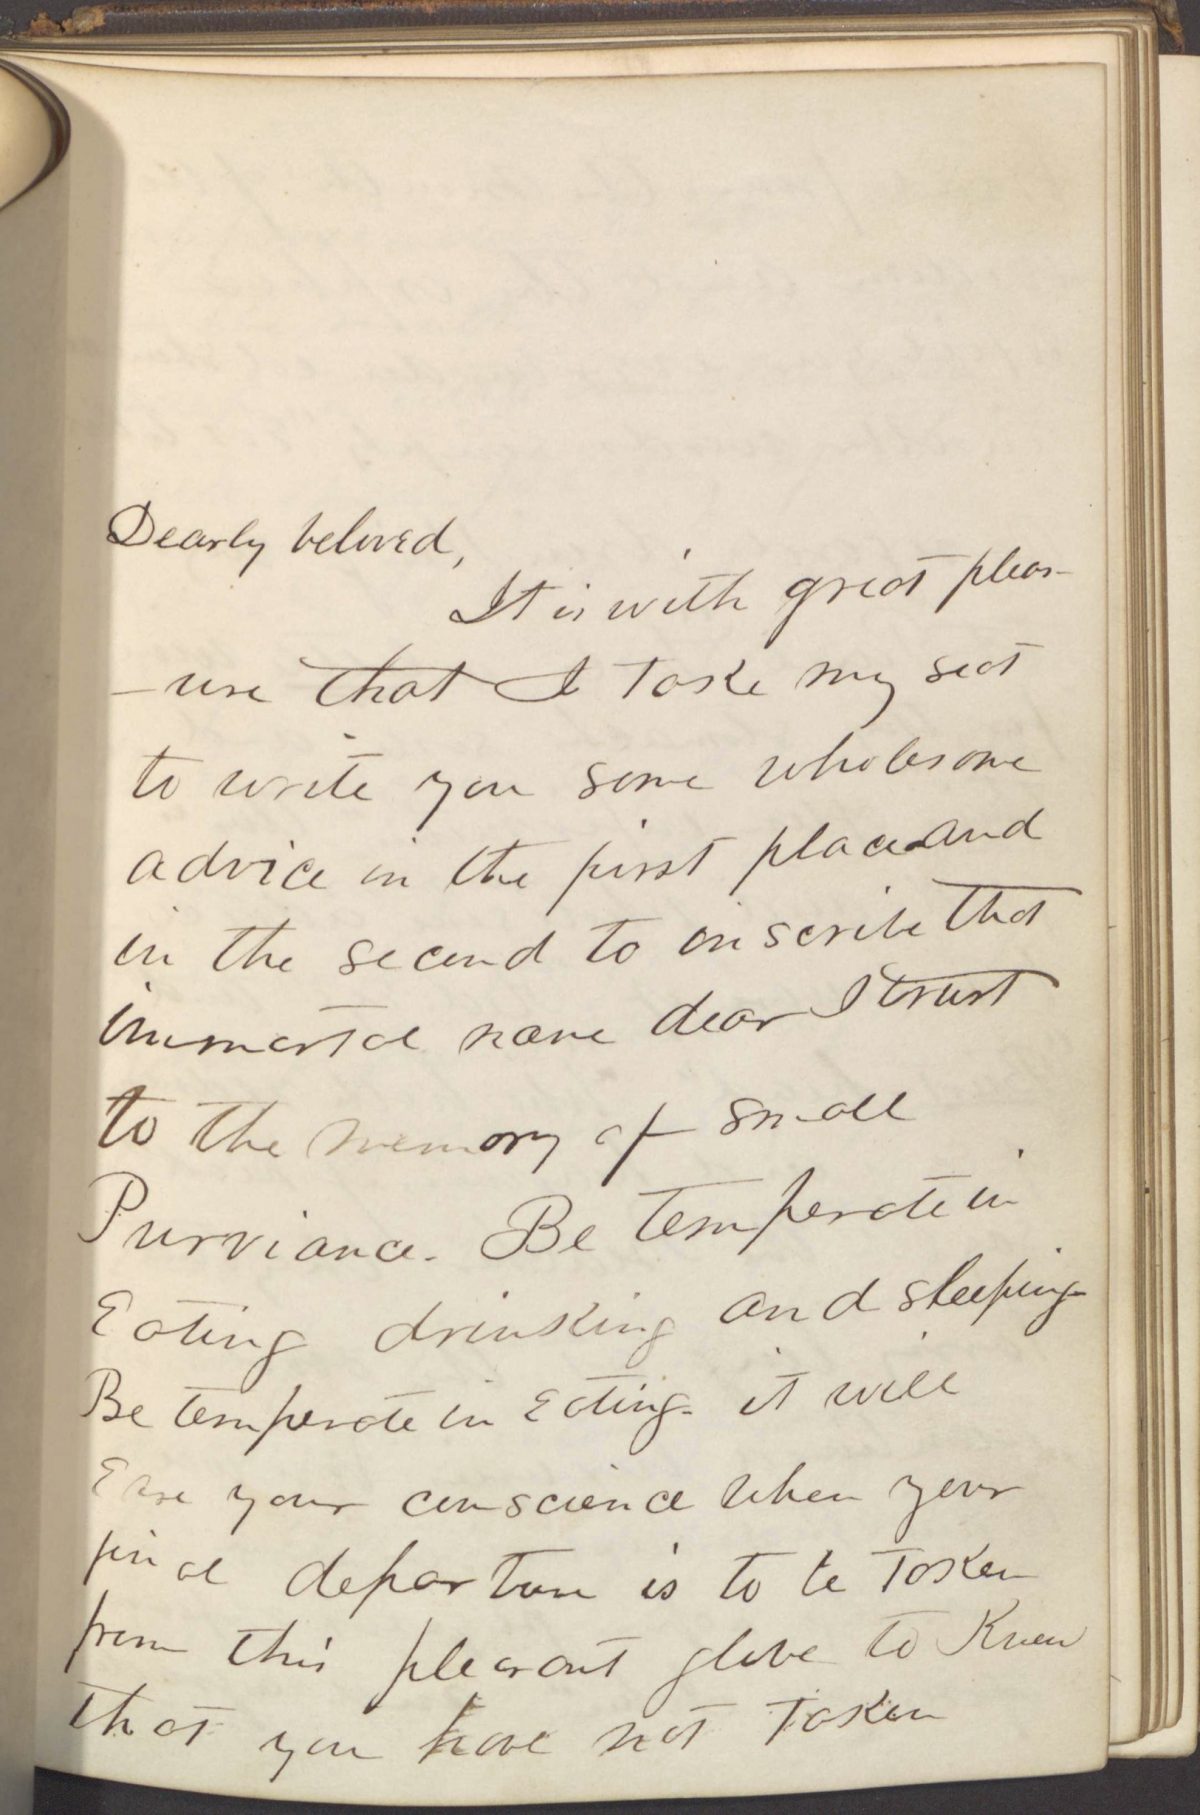 Autograph Book Entry by James R. Yerger